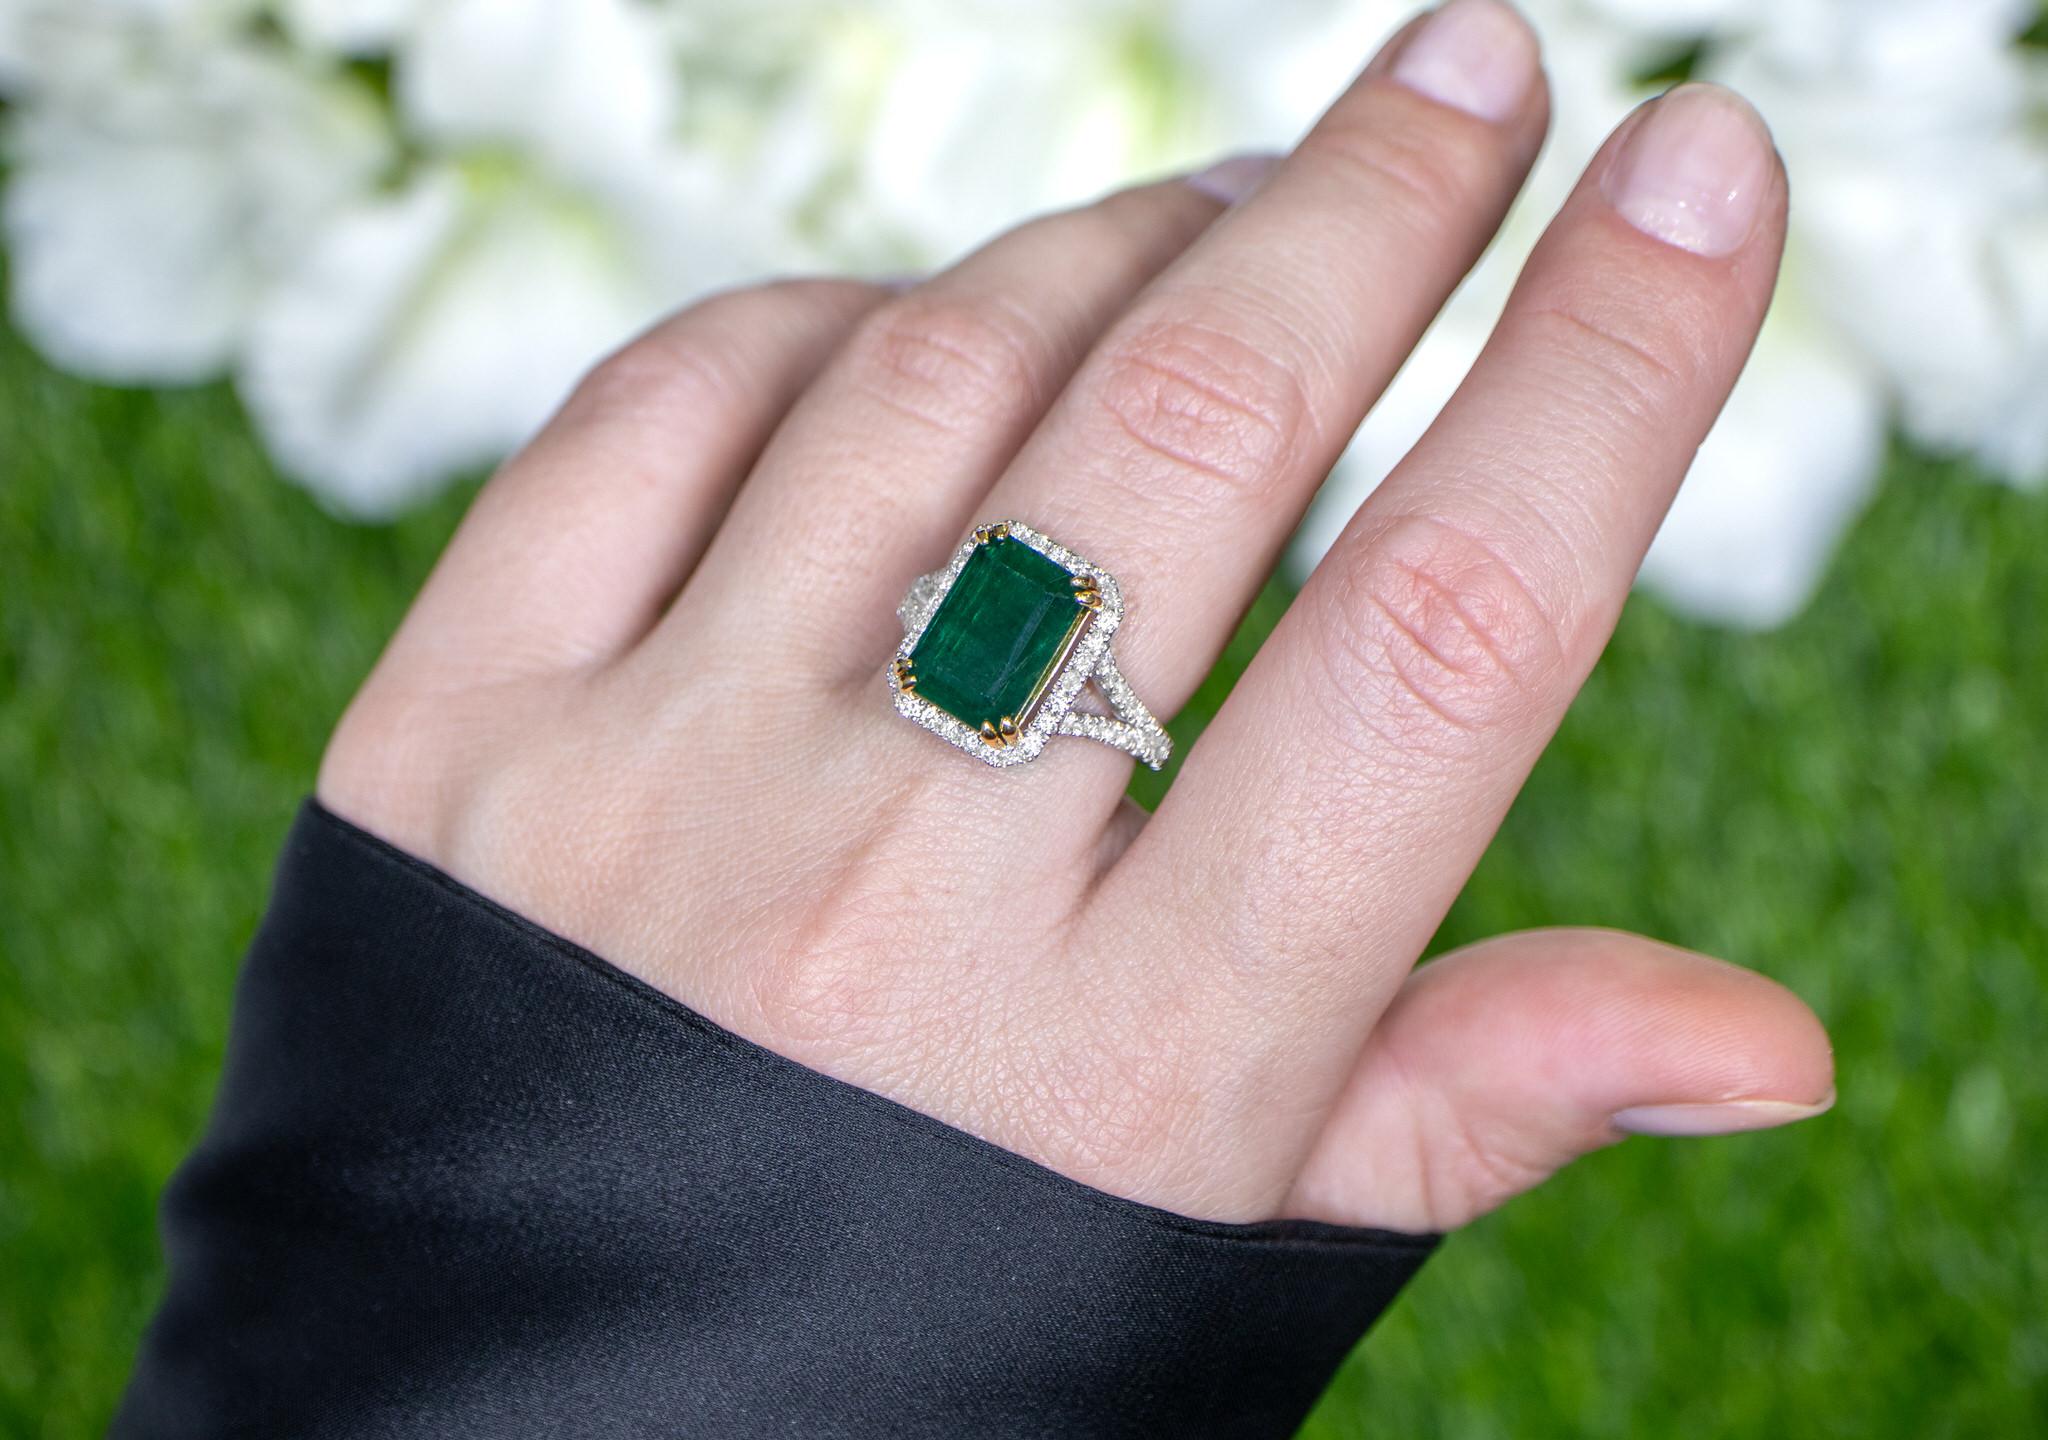 It comes with the Gemological Appraisal by GIA GG/AJP
All Gemstones are Natural
Emerald = 6.35 Carat
Diamonds = 0.83 Carats
Metal: 18K Gold
Ring Size: 6.75* US
*It can be resized complimentary